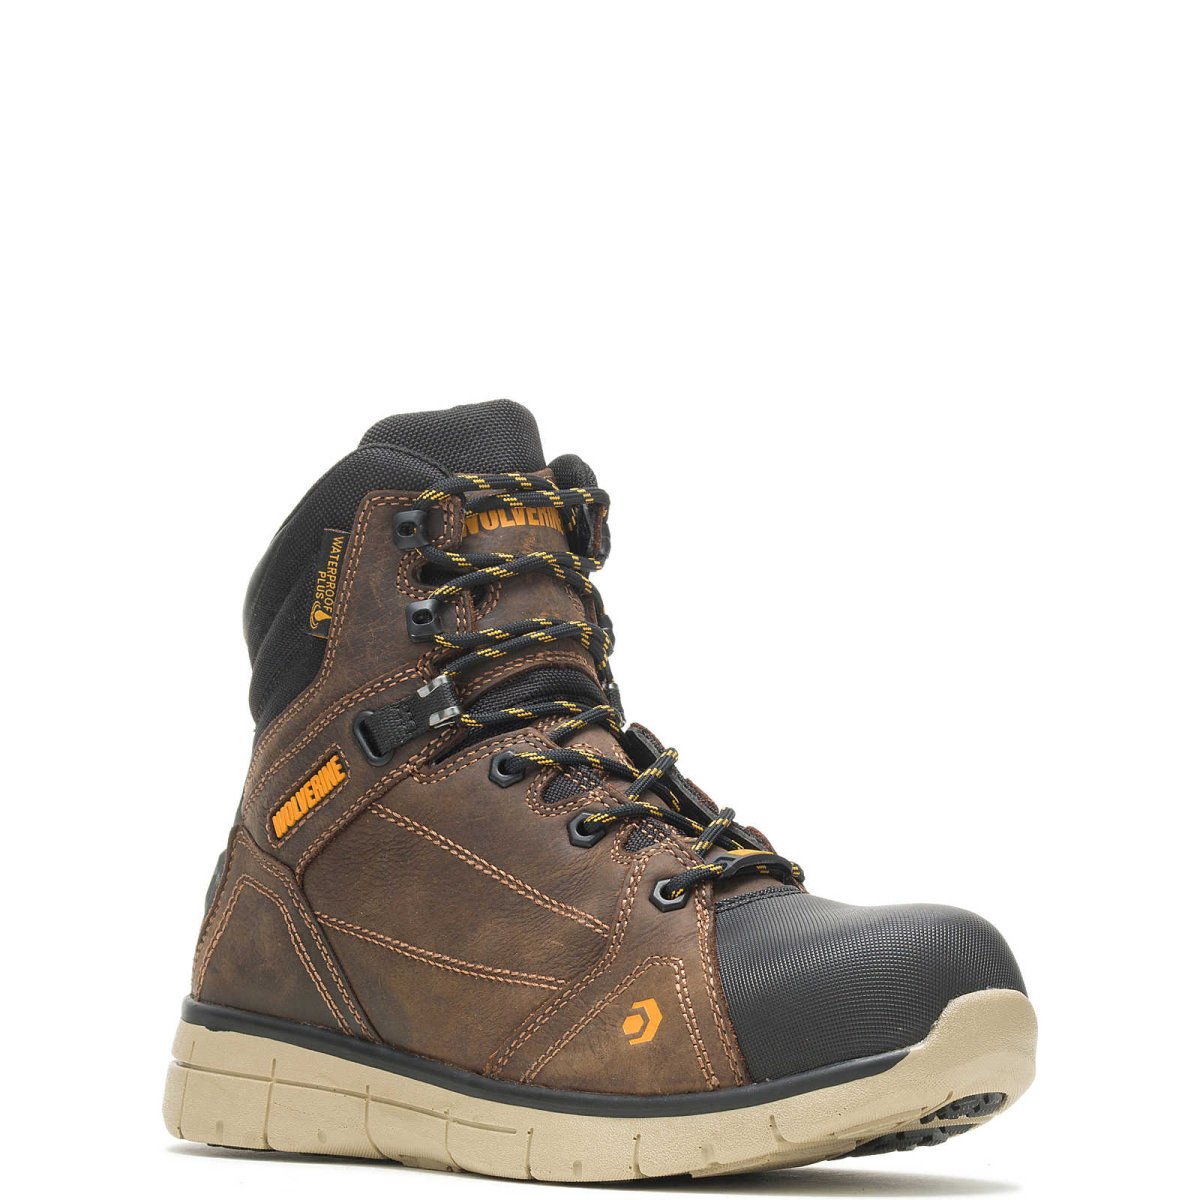 WOLVERINE RIGGER WATERPROOF MEN'S SAFETY TOE 6" WORK BOOT (W10797) IN SUMMER BROWN - TLW Shoes